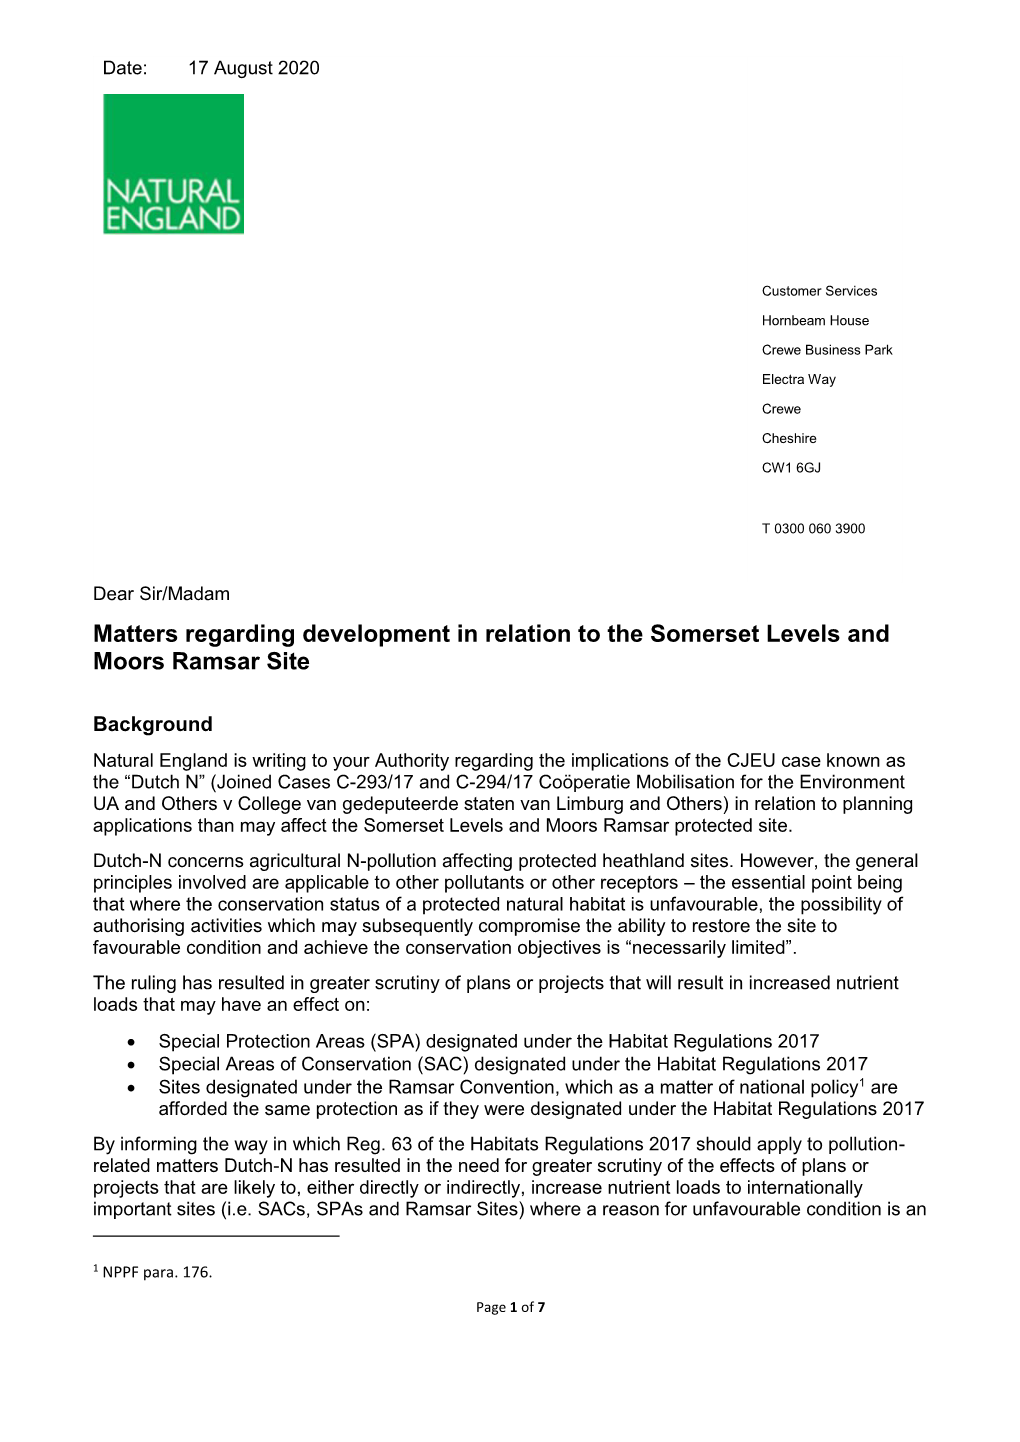 Matters Regarding Development in Relation to the Somerset Levels and Moors Ramsar Site